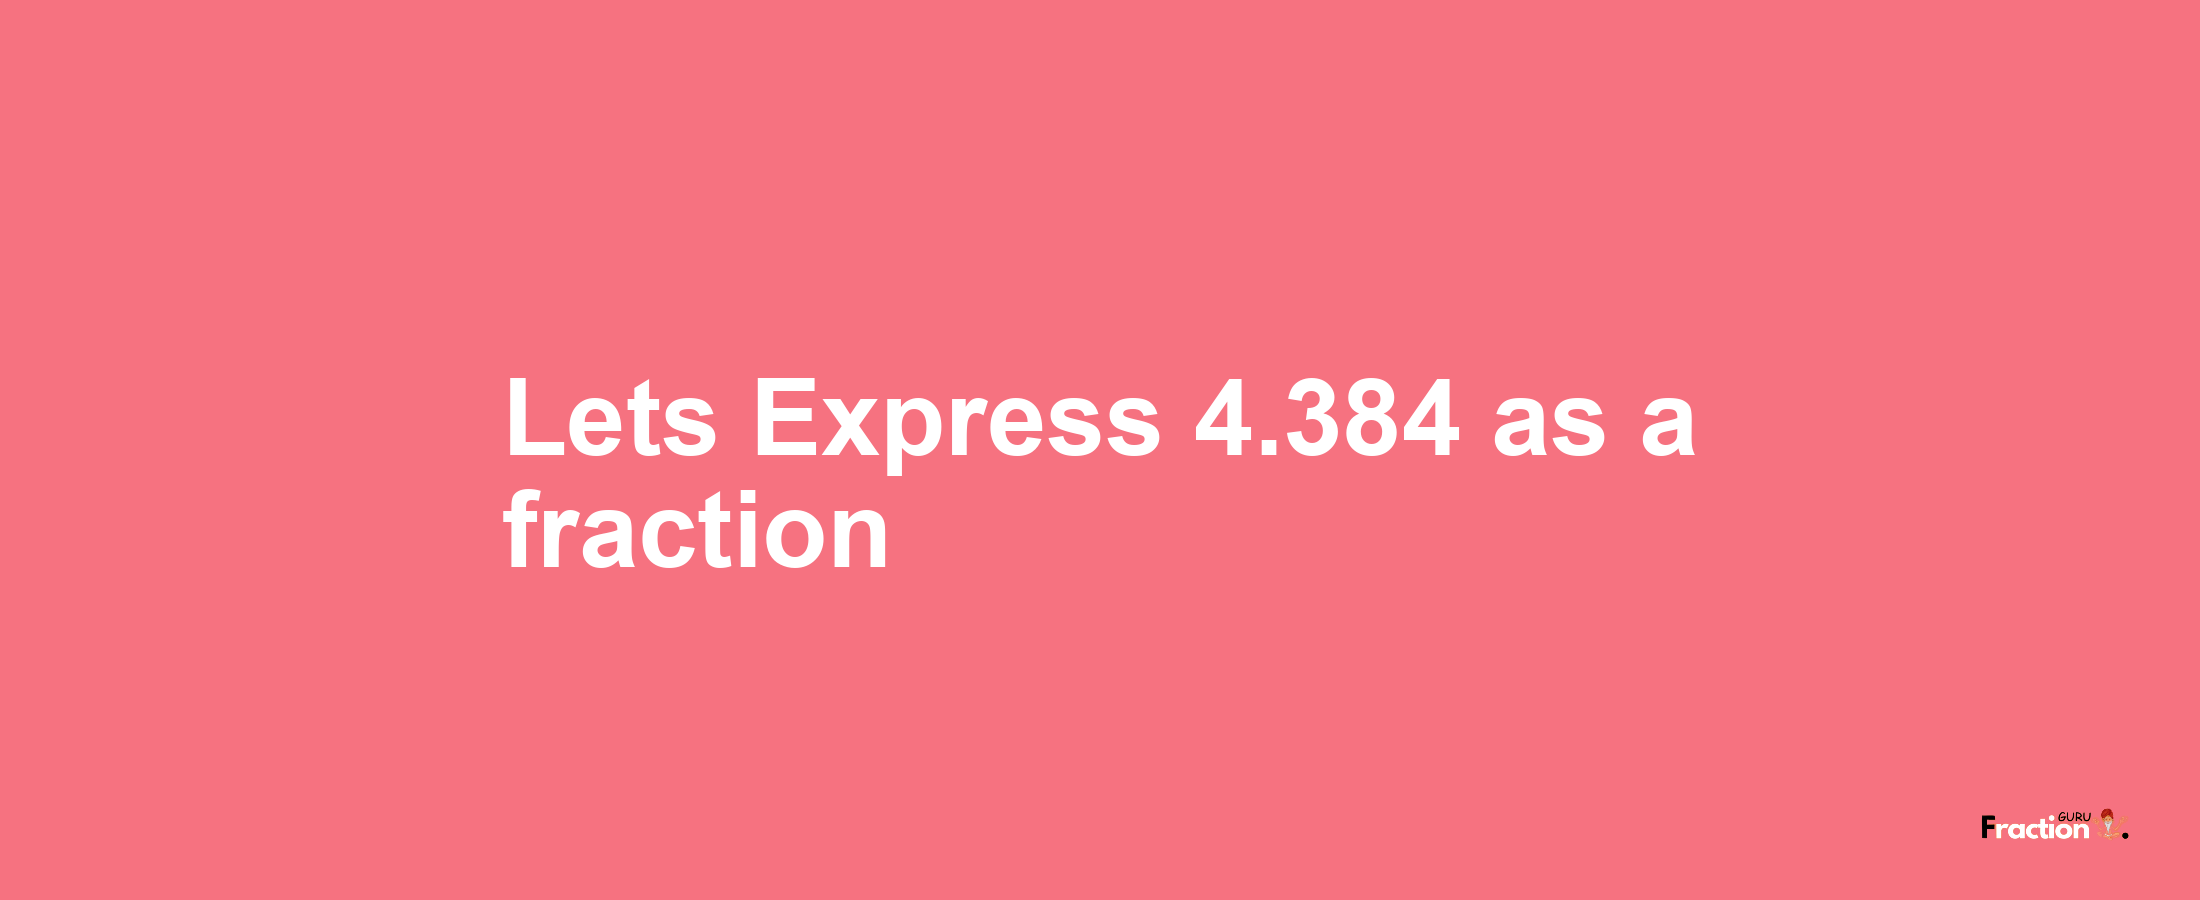 Lets Express 4.384 as afraction